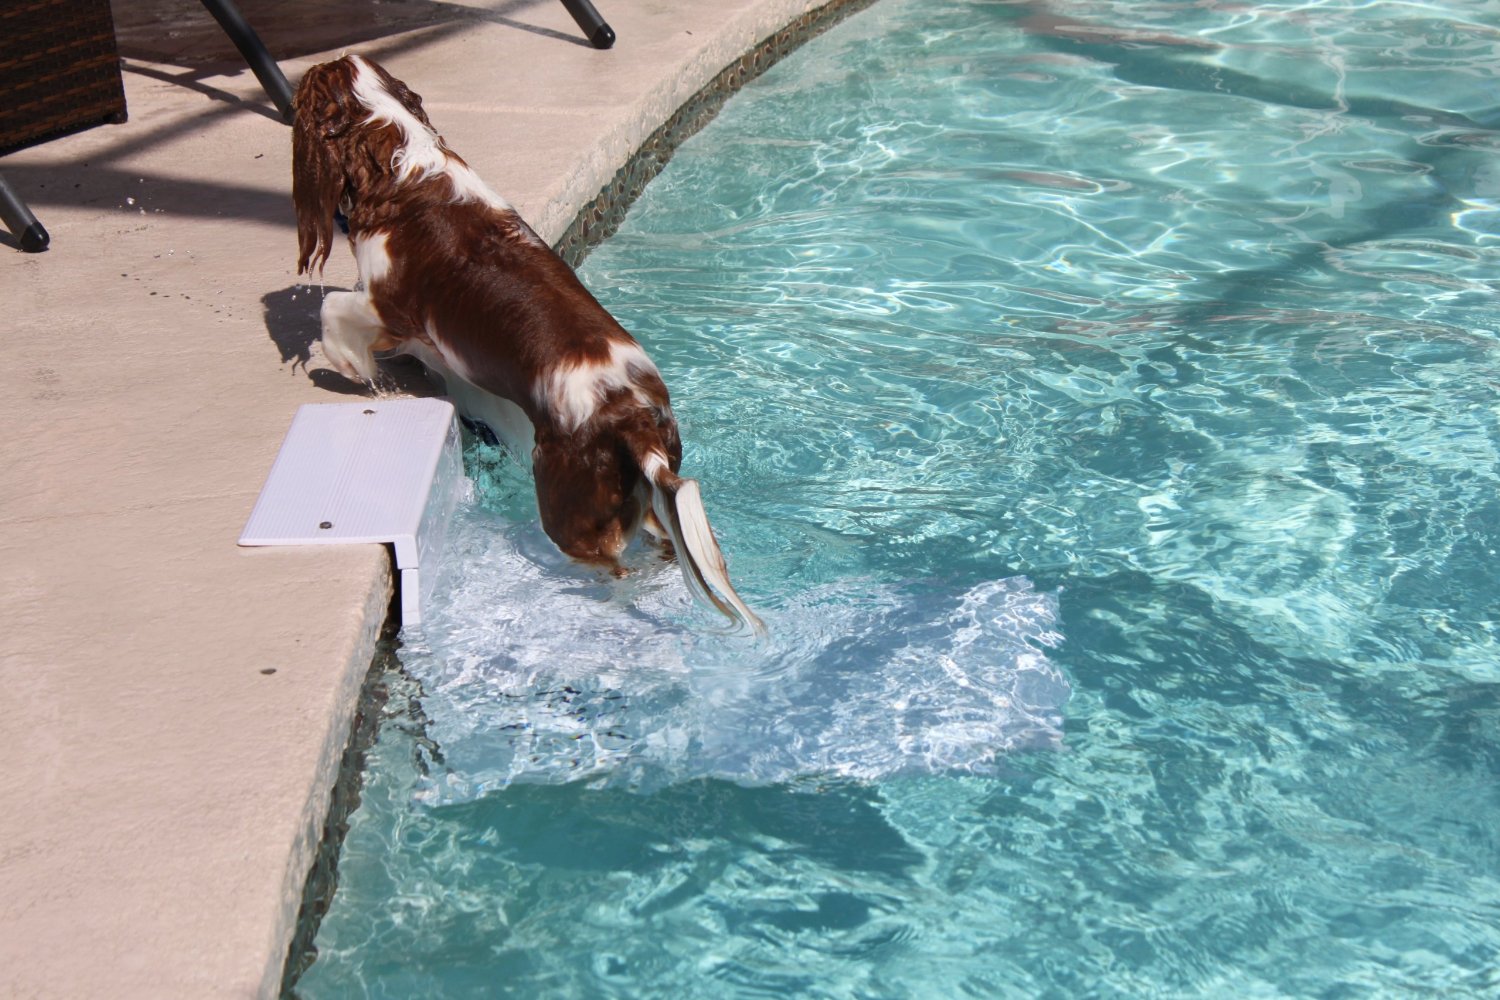 Stairs For DogsGive Your Dog a Helping Hand! Pool Steps 